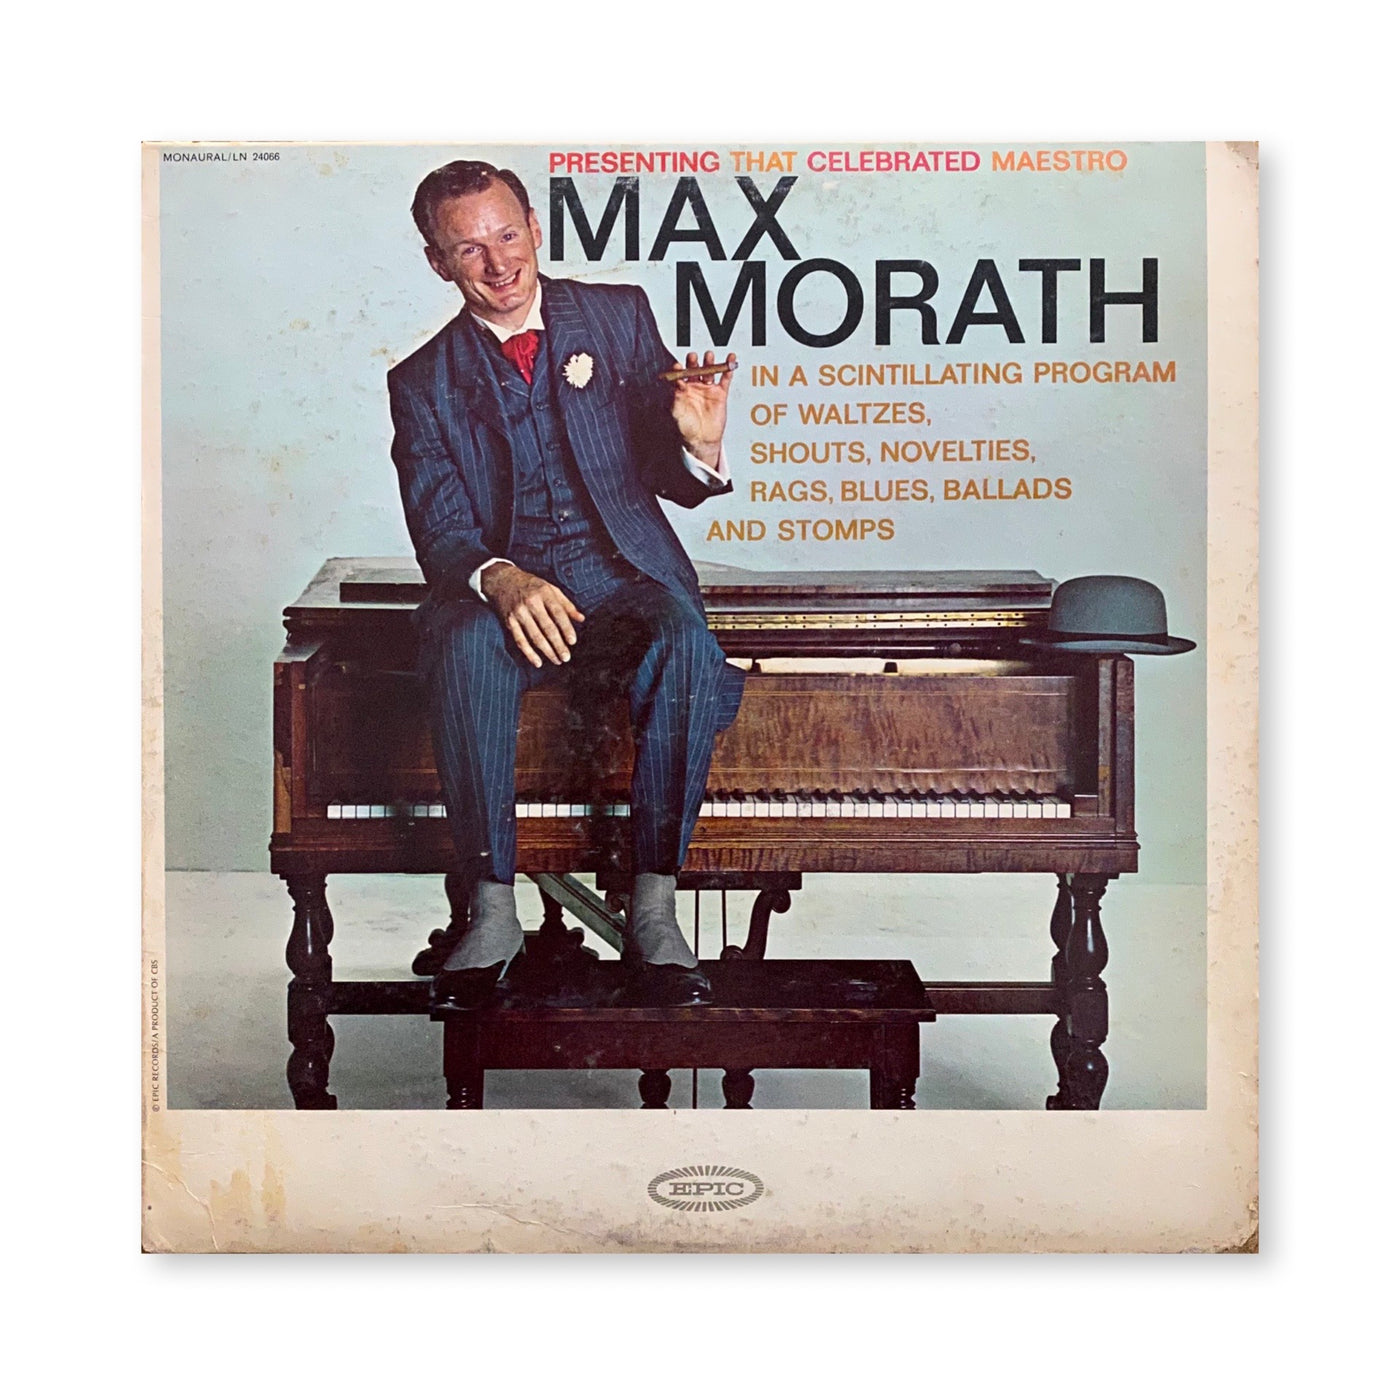 Max Morath - That Celebrated Maestro (In A Scintillating Program Of Waltzes, Shouts, Novelties, Rags, Blues, Ballads And Stomps)